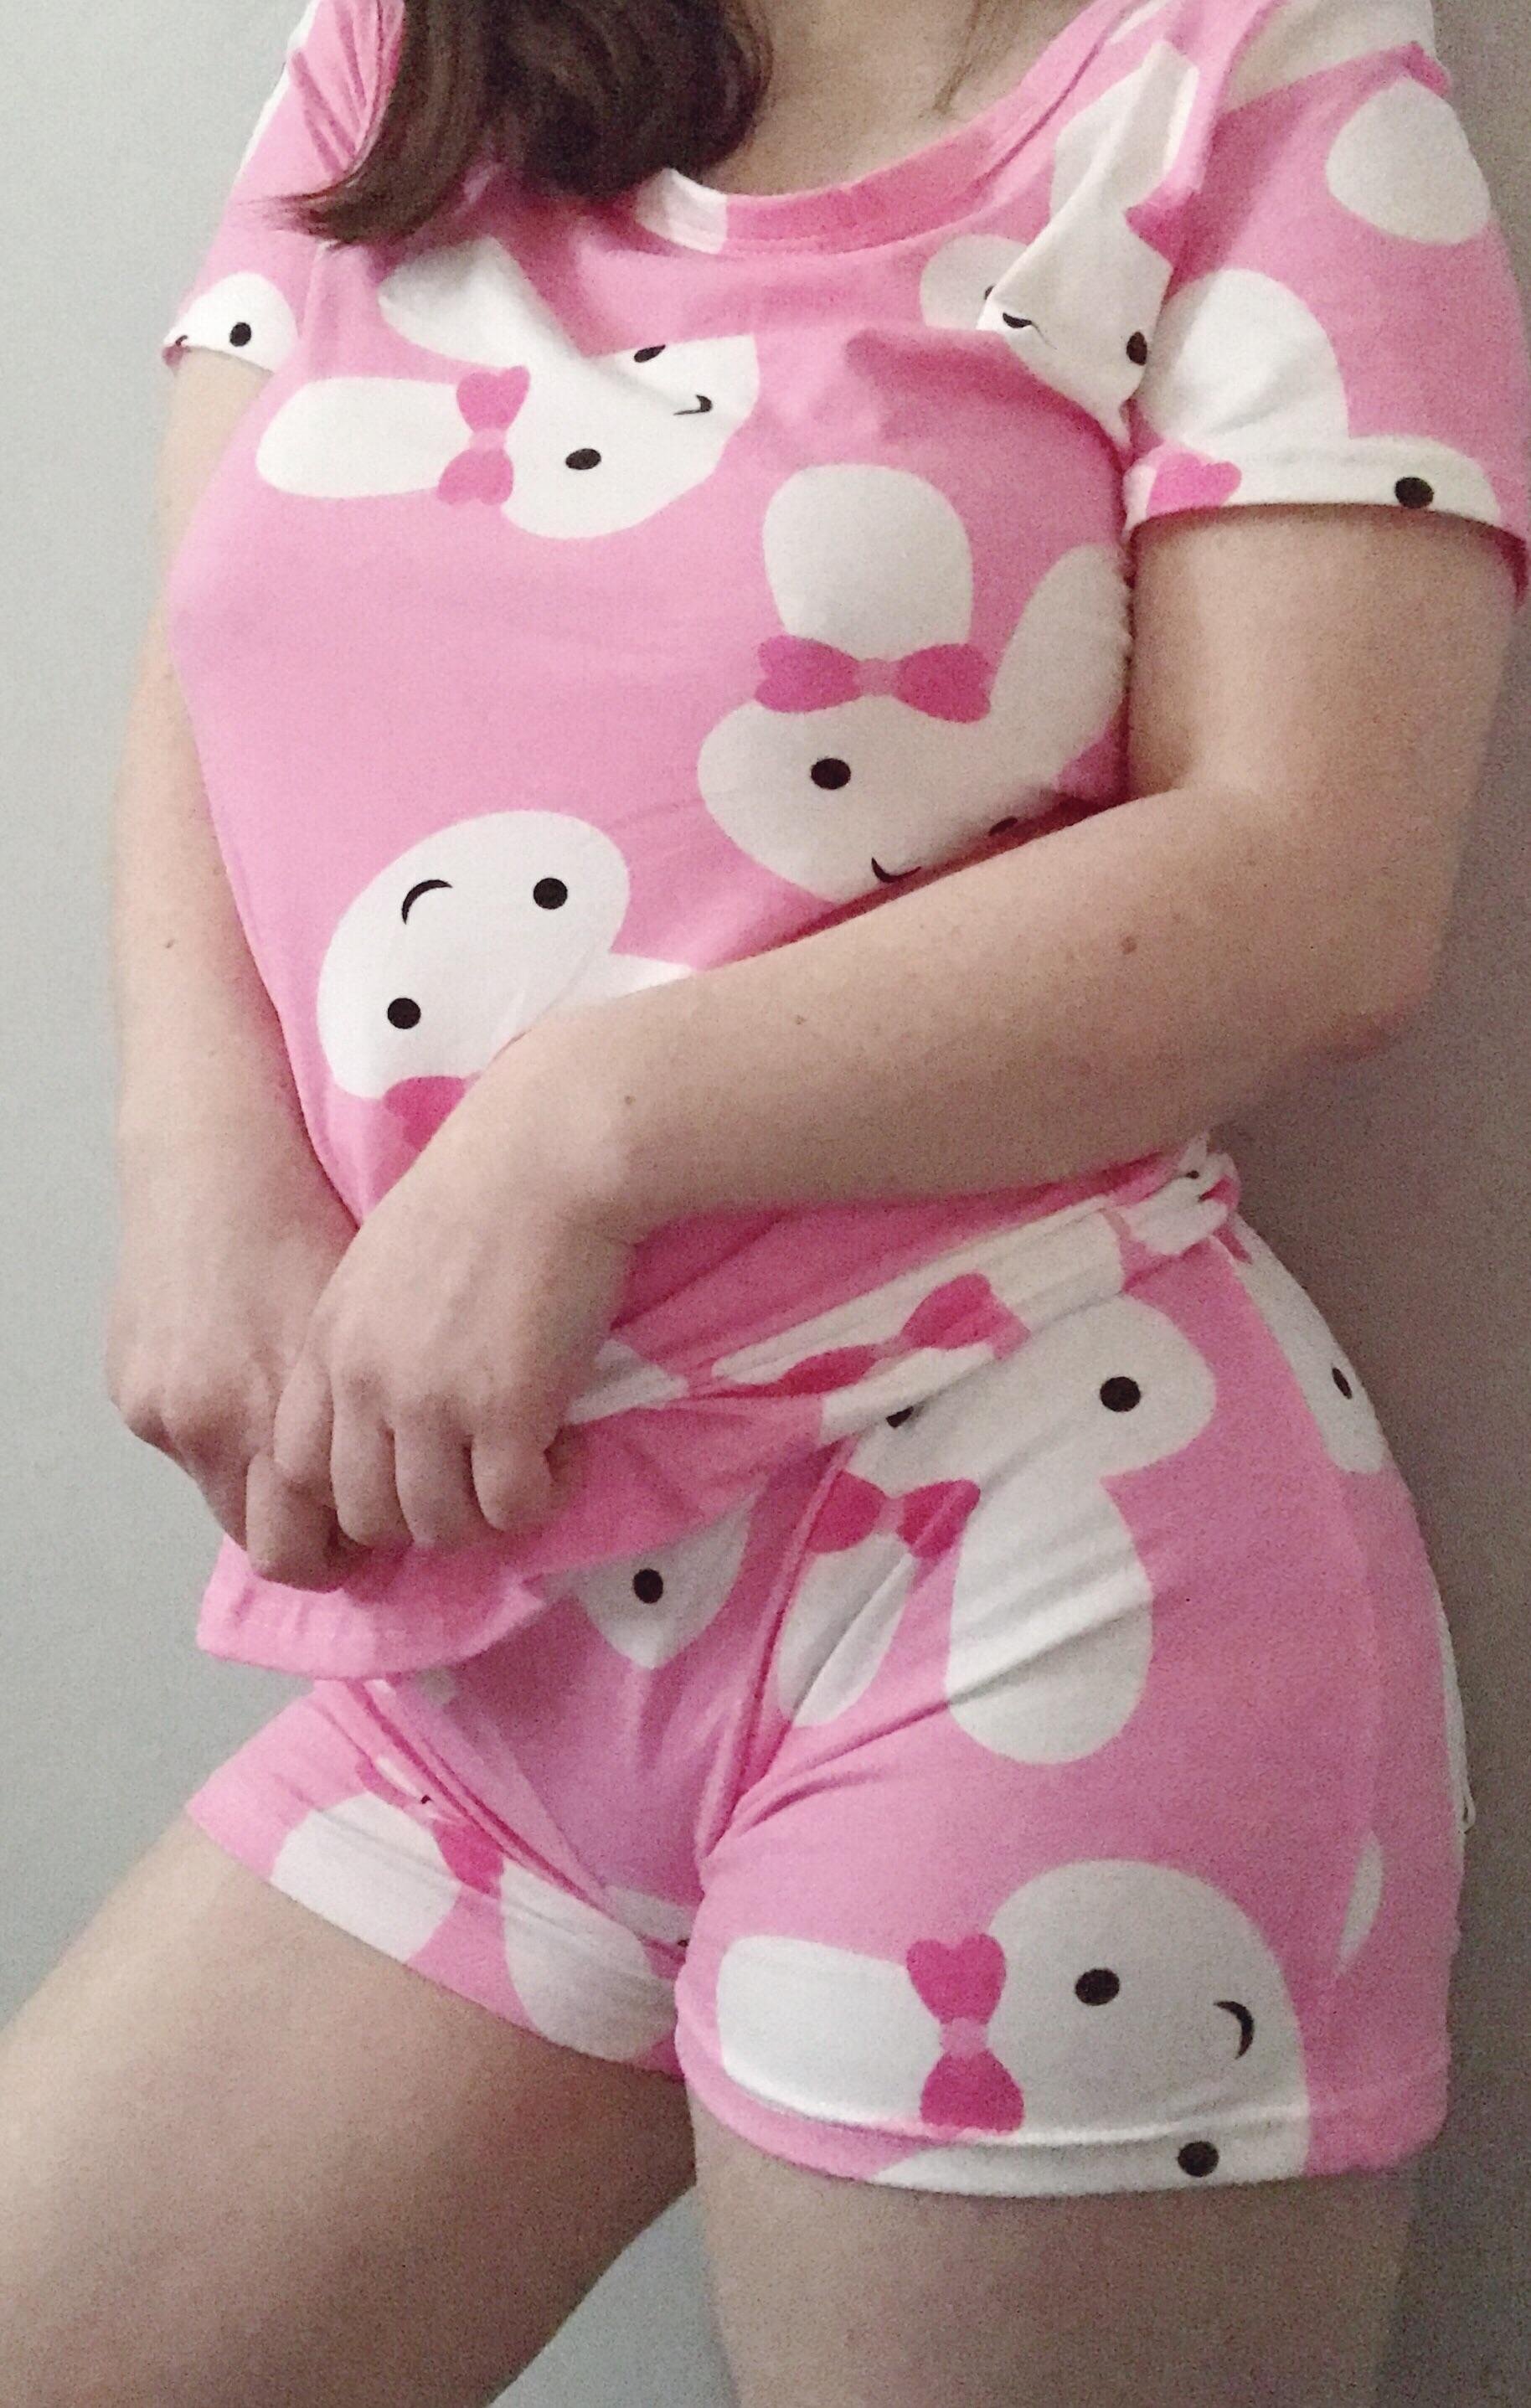 Figured I’d show off my new bunny jammies for all of you! :3